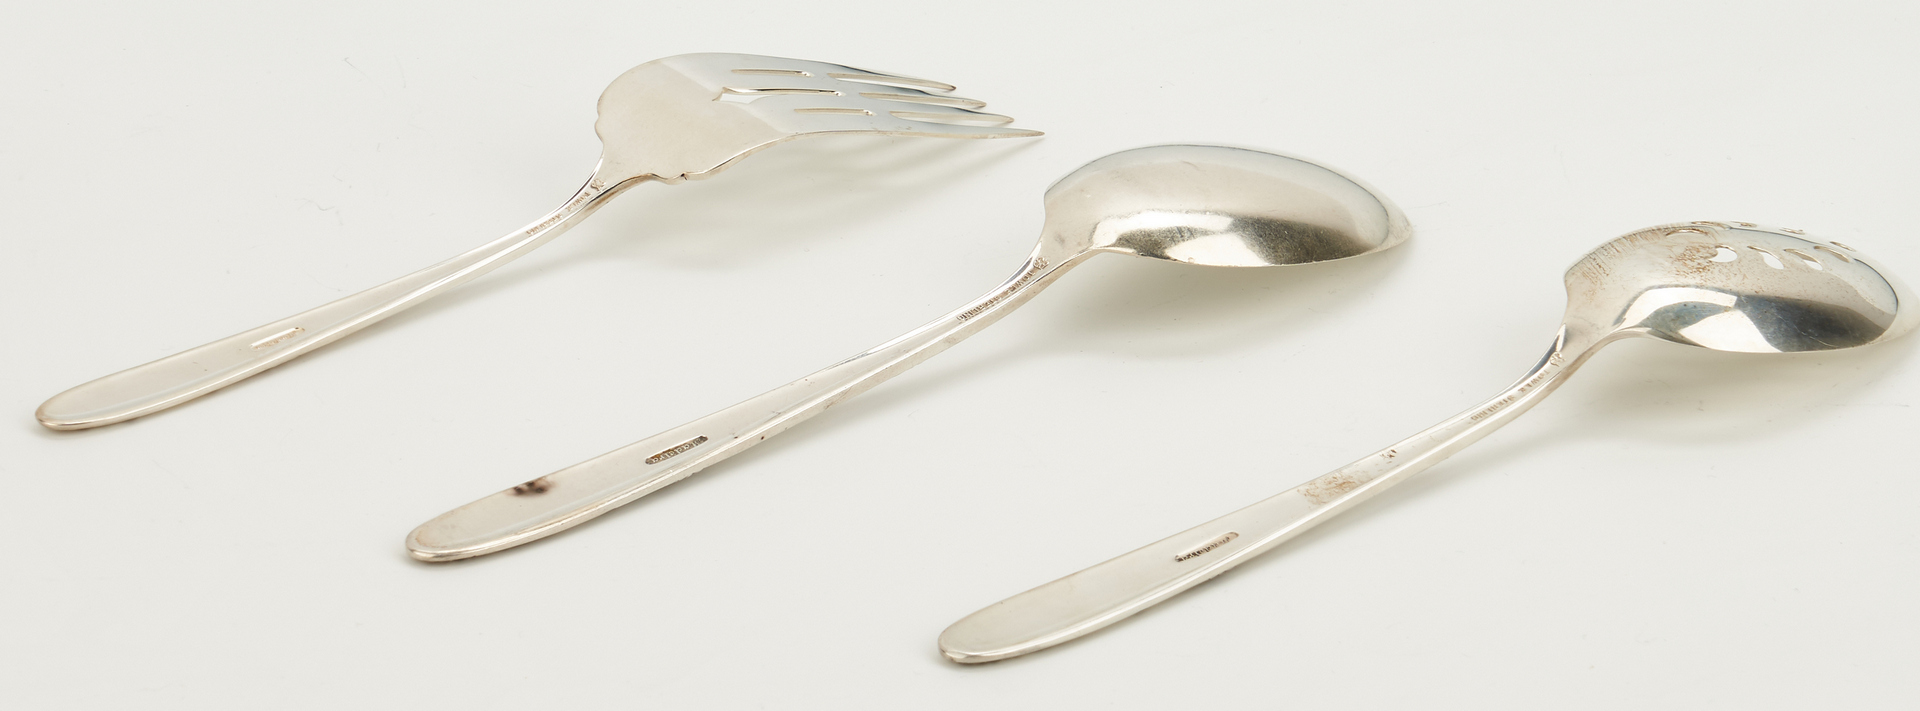 Lot 57: 192 Pcs. Towle Madeira Sterling Flatware